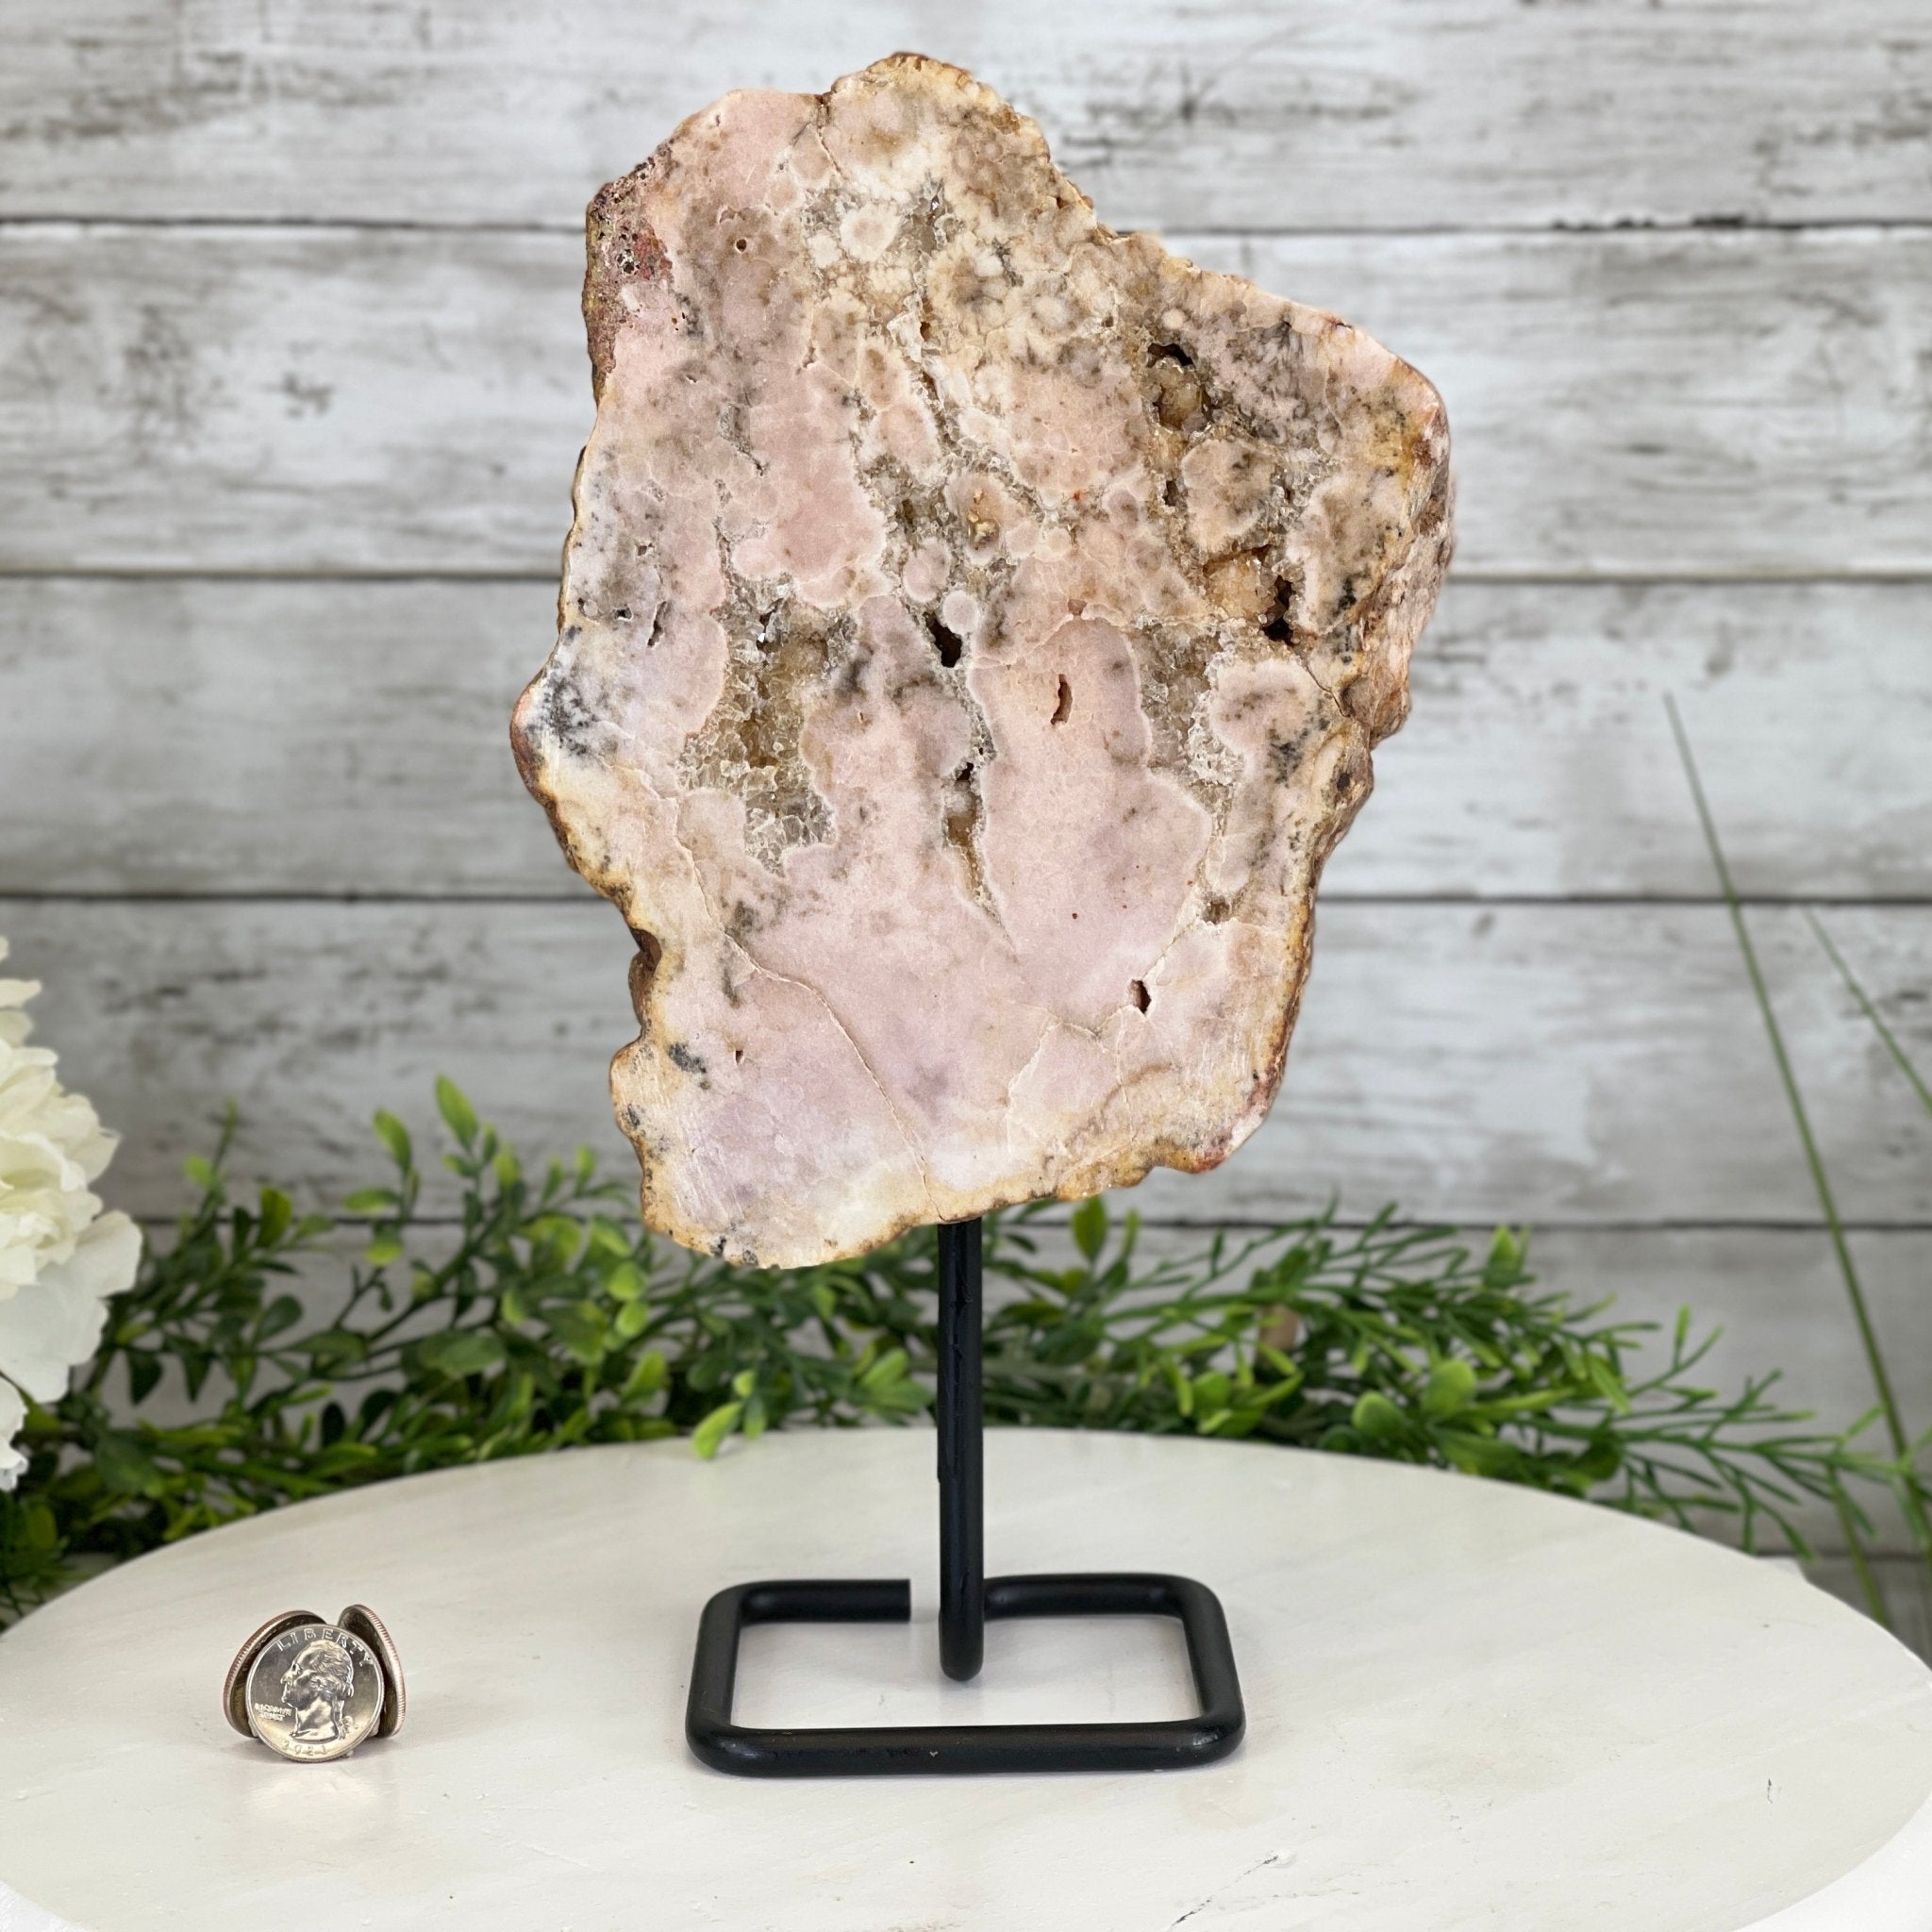 Pink Amethyst Slice on a Stand, 5.7 lbs and 11.7" Tall #5742-0041 by Brazil Gems - Brazil GemsBrazil GemsPink Amethyst Slice on a Stand, 5.7 lbs and 11.7" Tall #5742-0041 by Brazil GemsSlices on Fixed Bases5742-0041